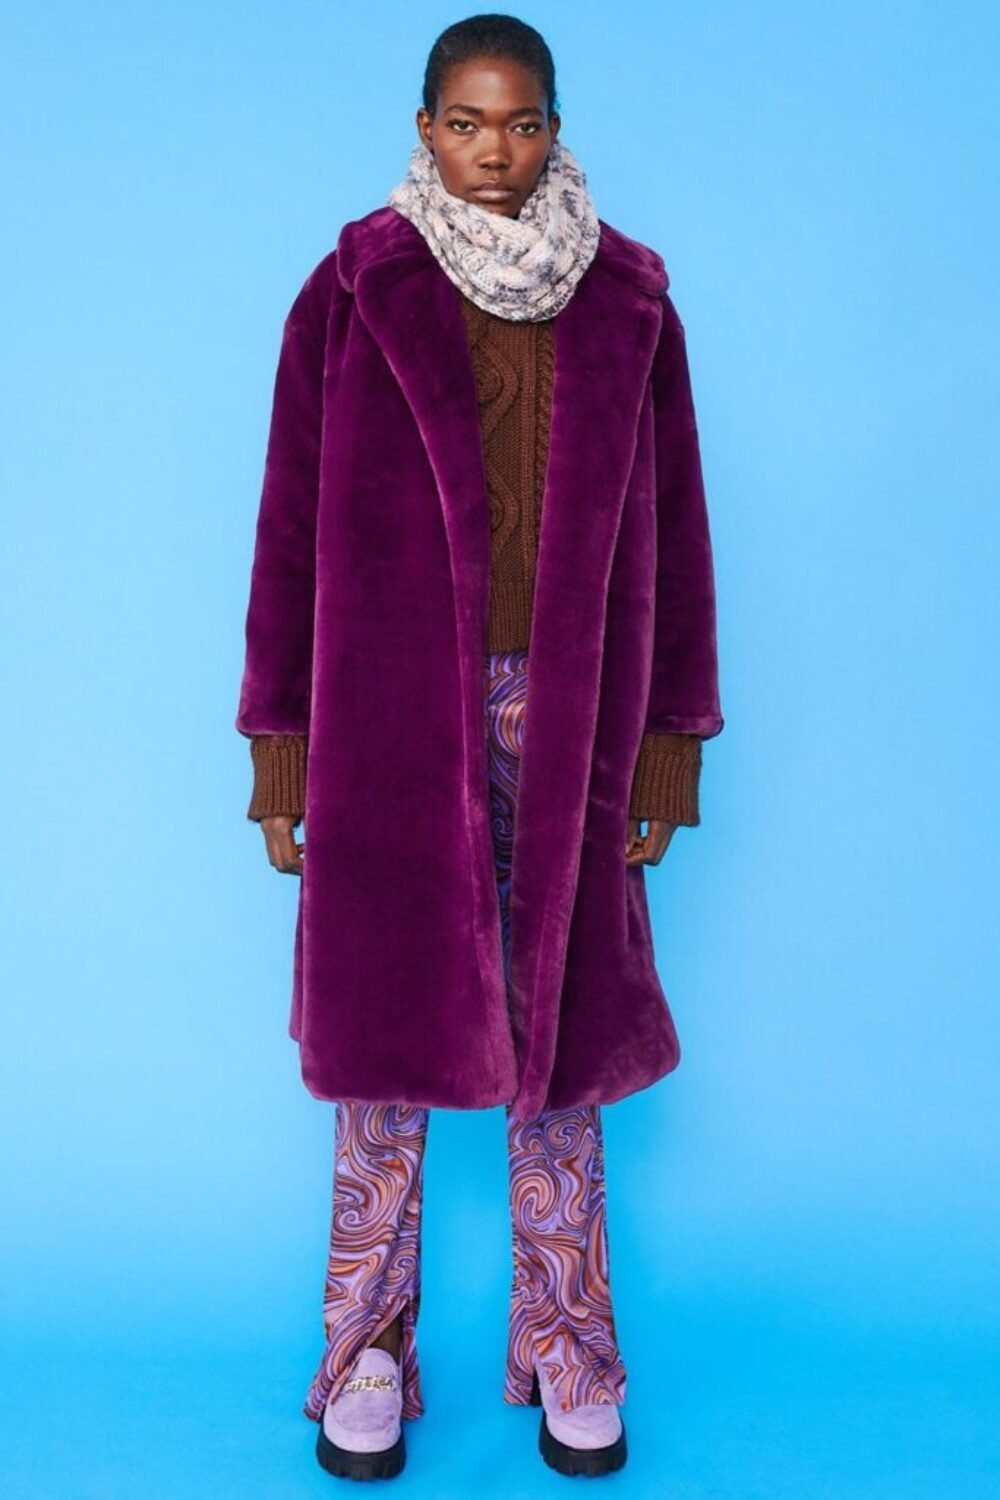 Shop Lux Purple Faux Fur Midi Shaved Shearling Coat and women's luxury and designer clothes at www.lux-apparel.co.uk